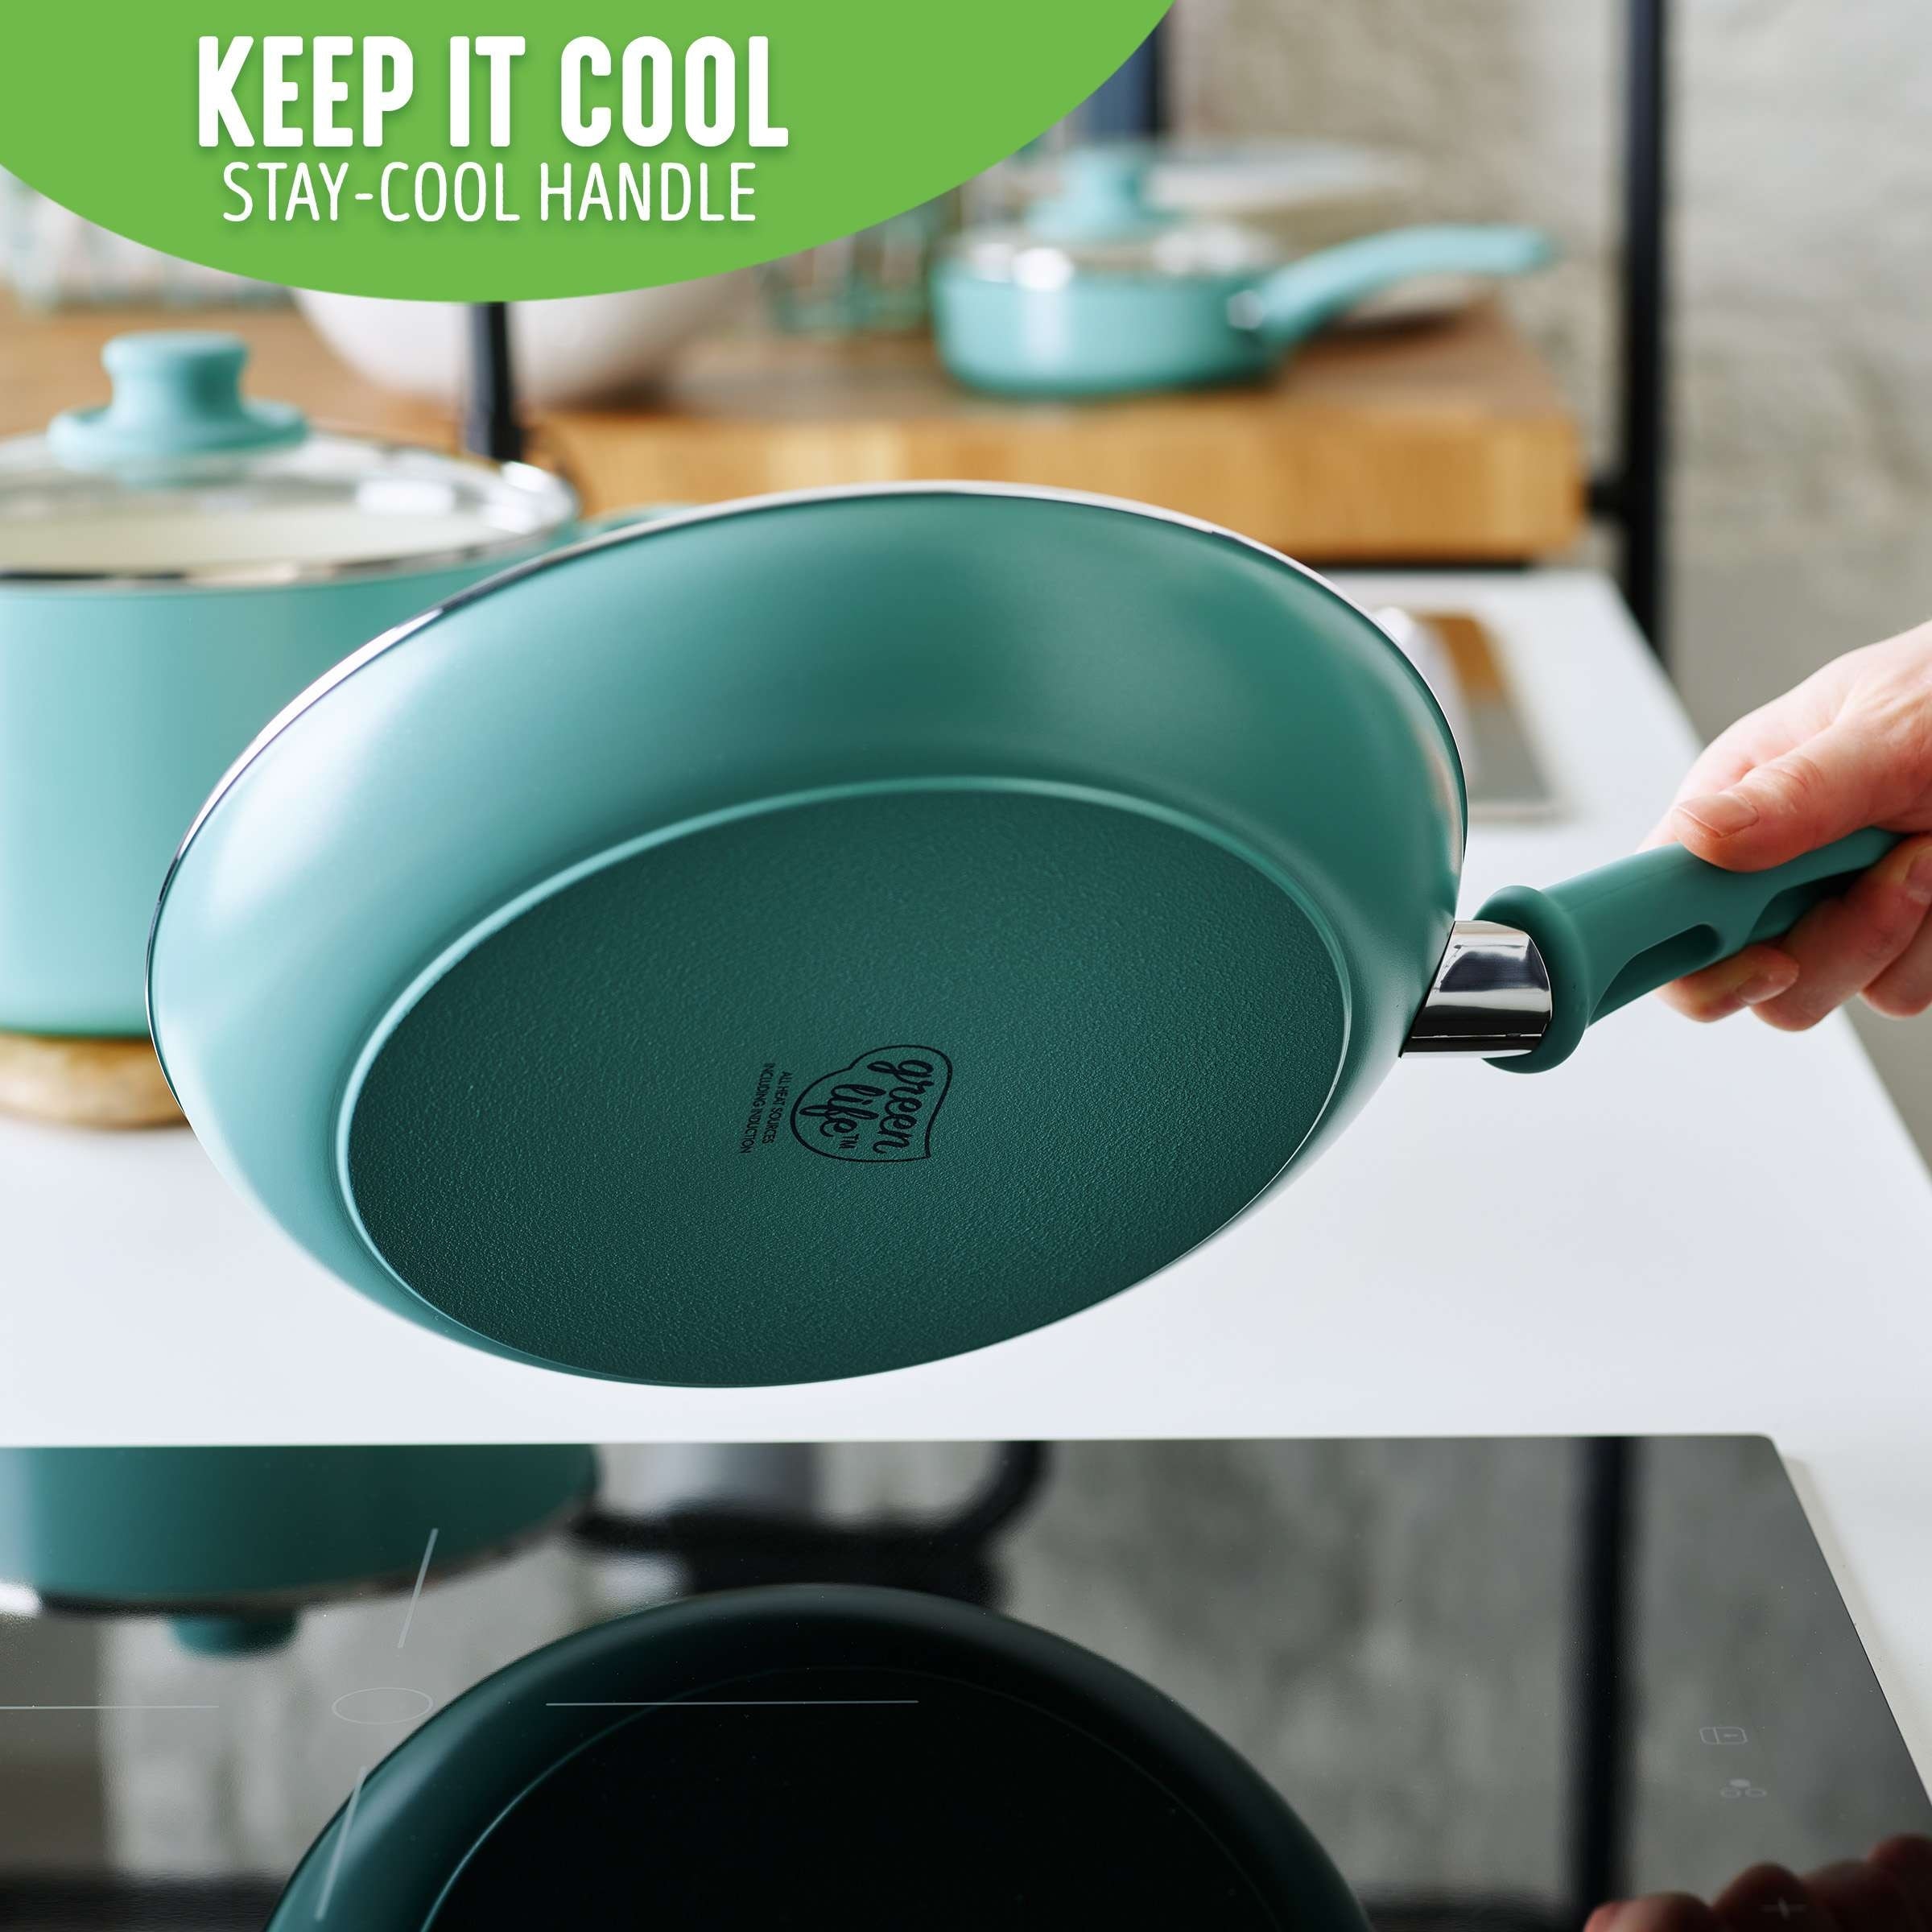 https://ak1.ostkcdn.com/images/products/is/images/direct/2f5113b87ae2aaa4a33a697e654eecb200db1de3/GreenLife-Soft-Grip-15pc-Cookware-Set.jpg